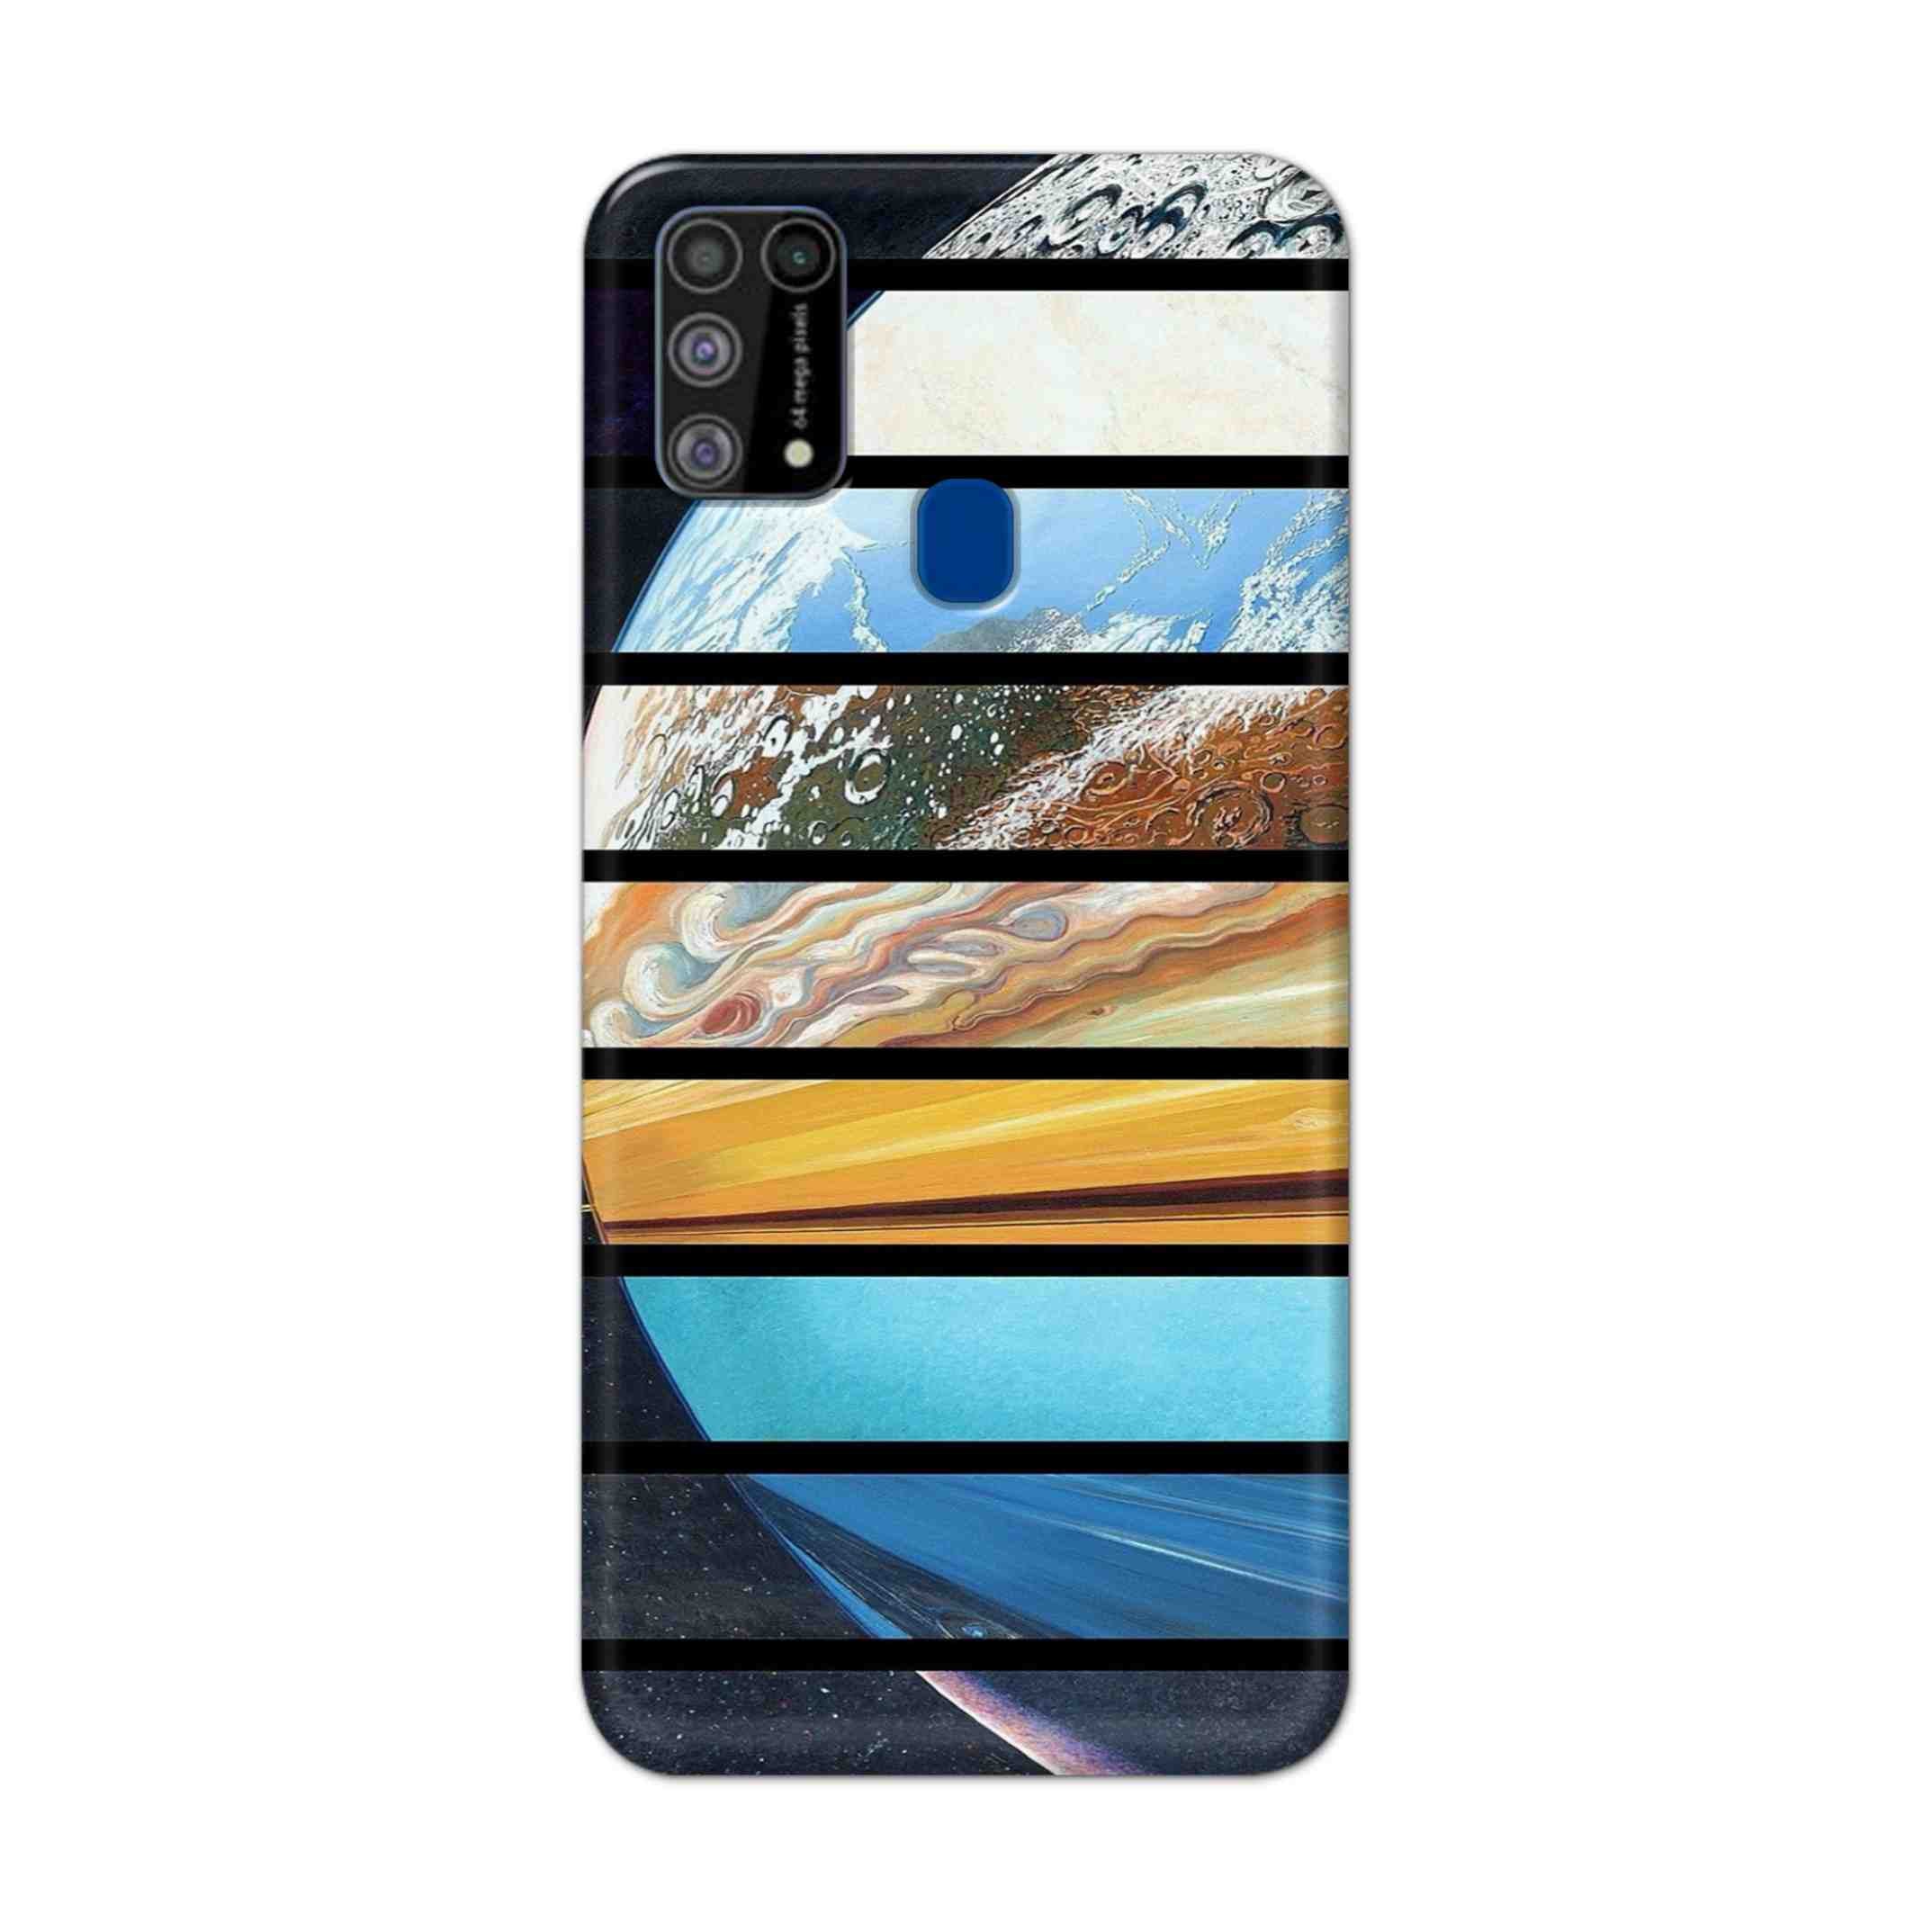 Buy Colourful Earth Hard Back Mobile Phone Case Cover For Samsung Galaxy M31 Online